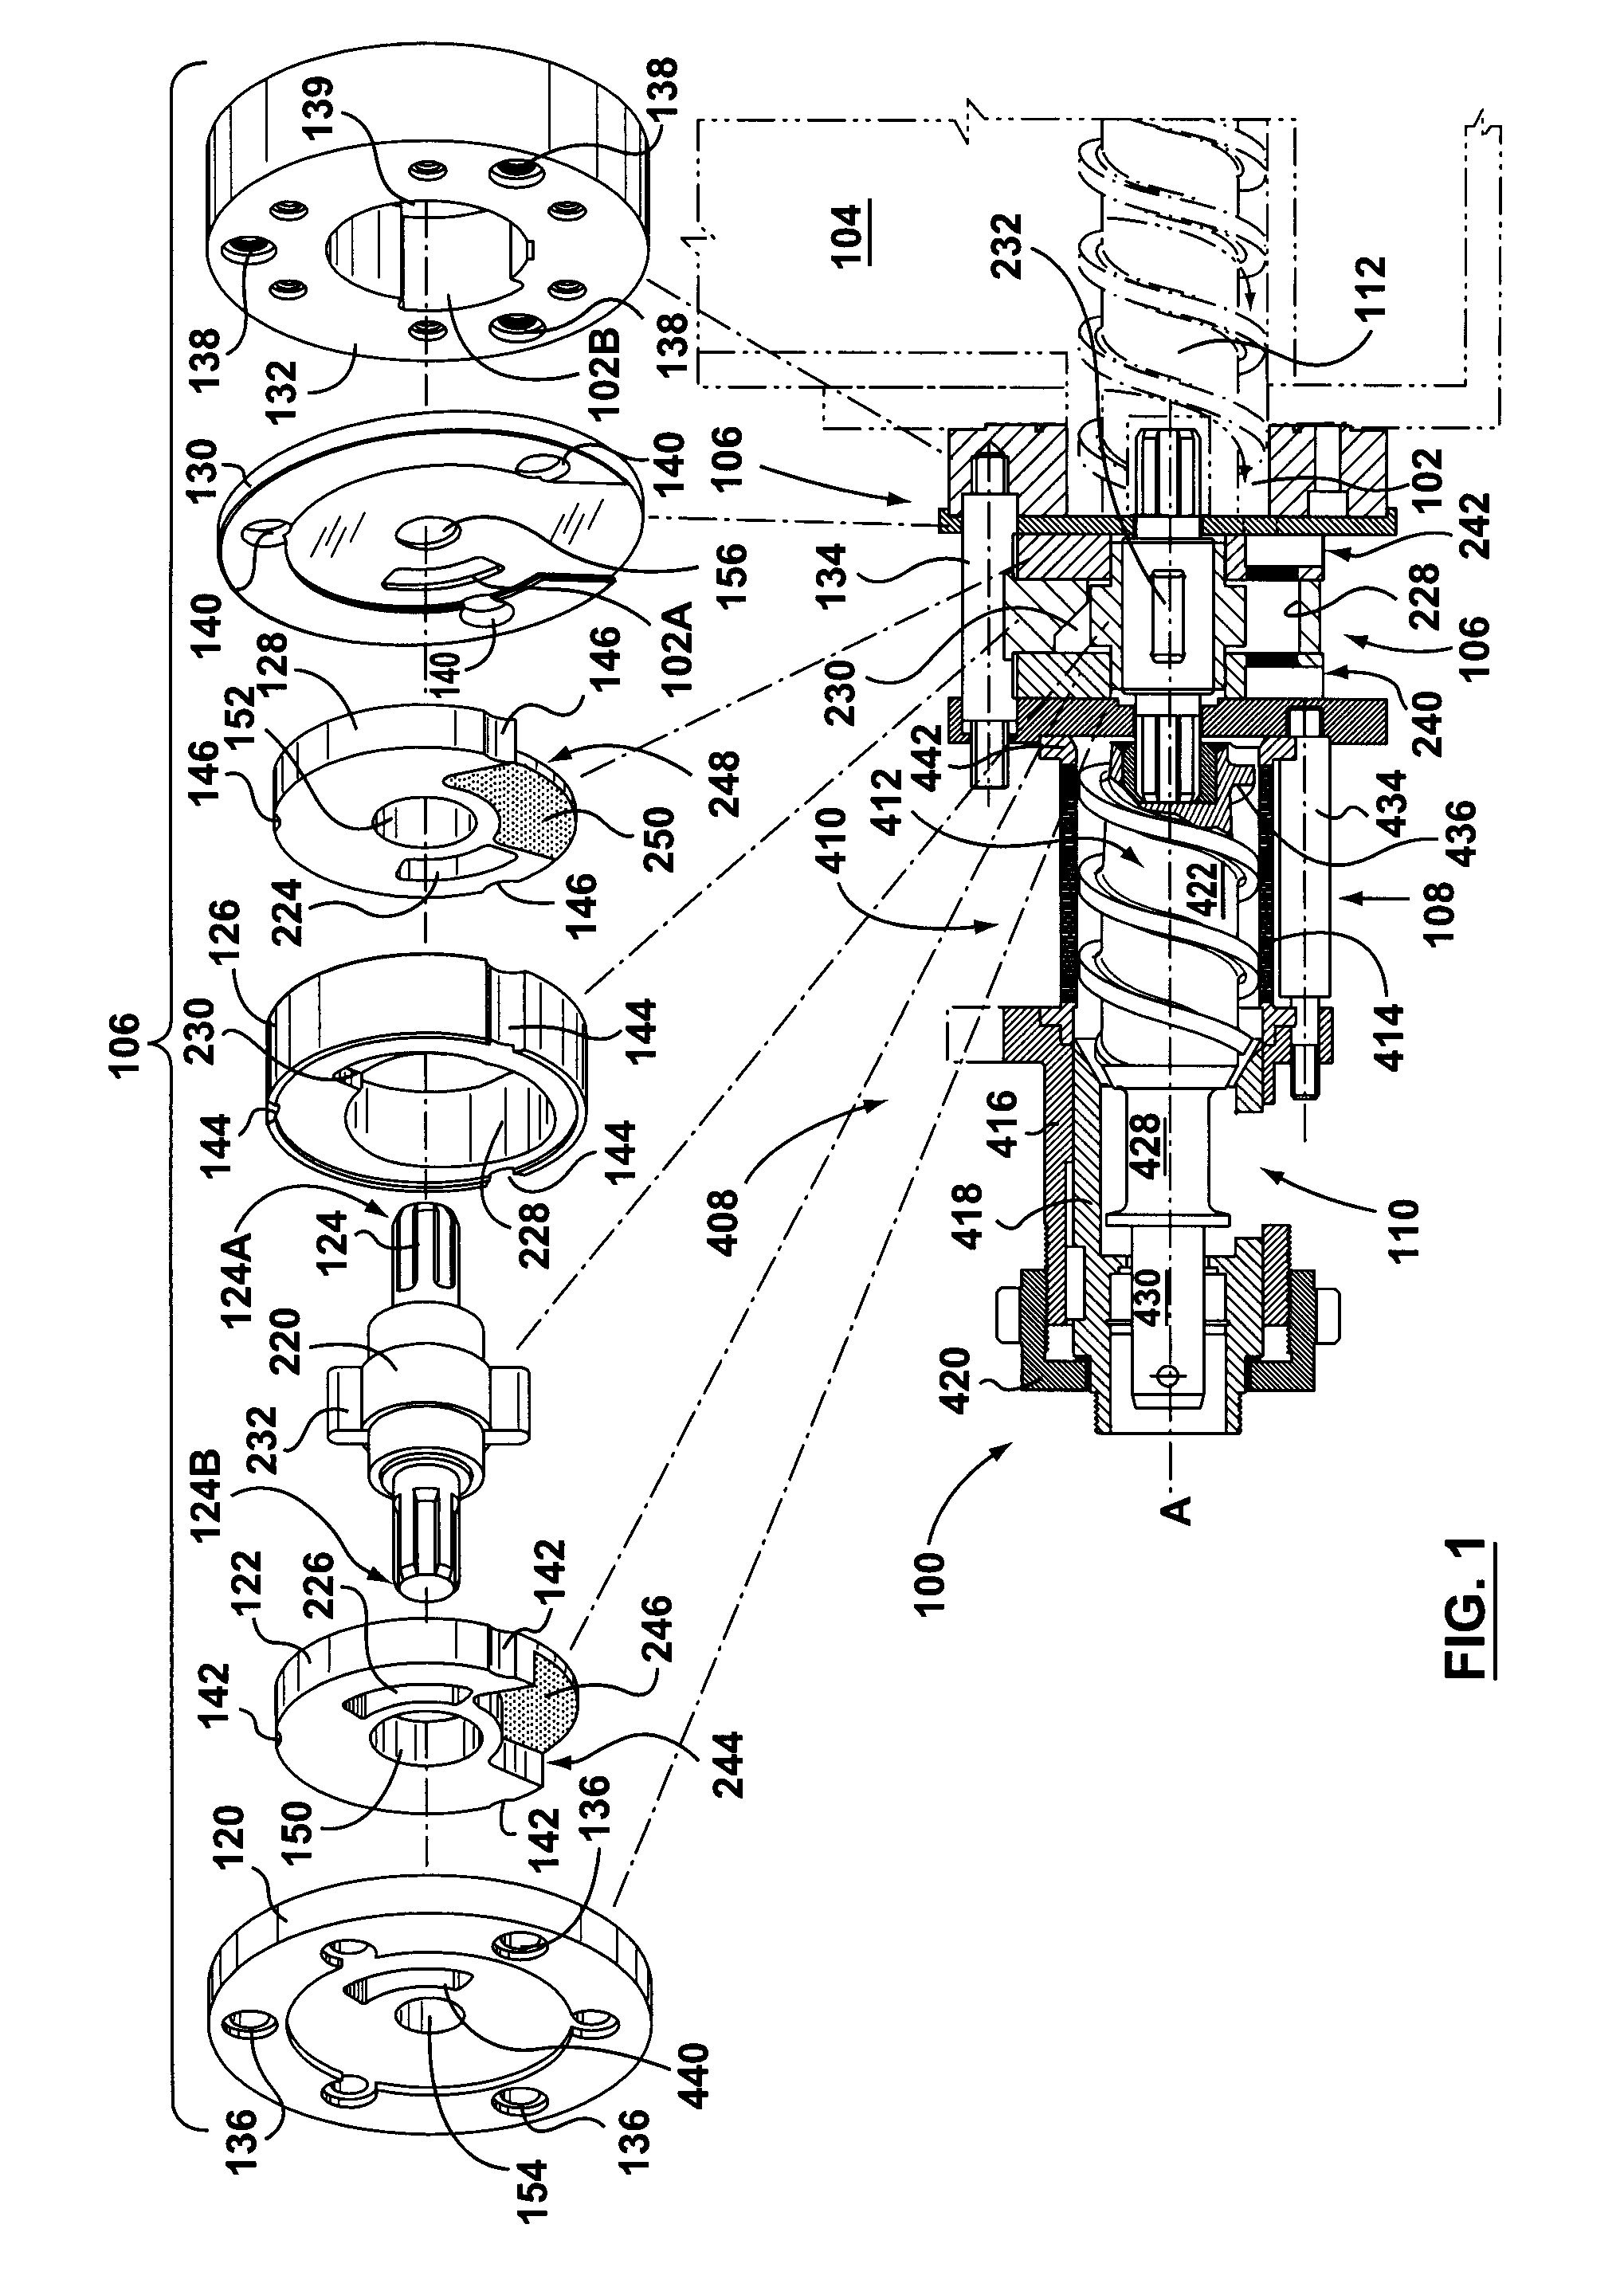 Method and apparatus for separating meat from bone